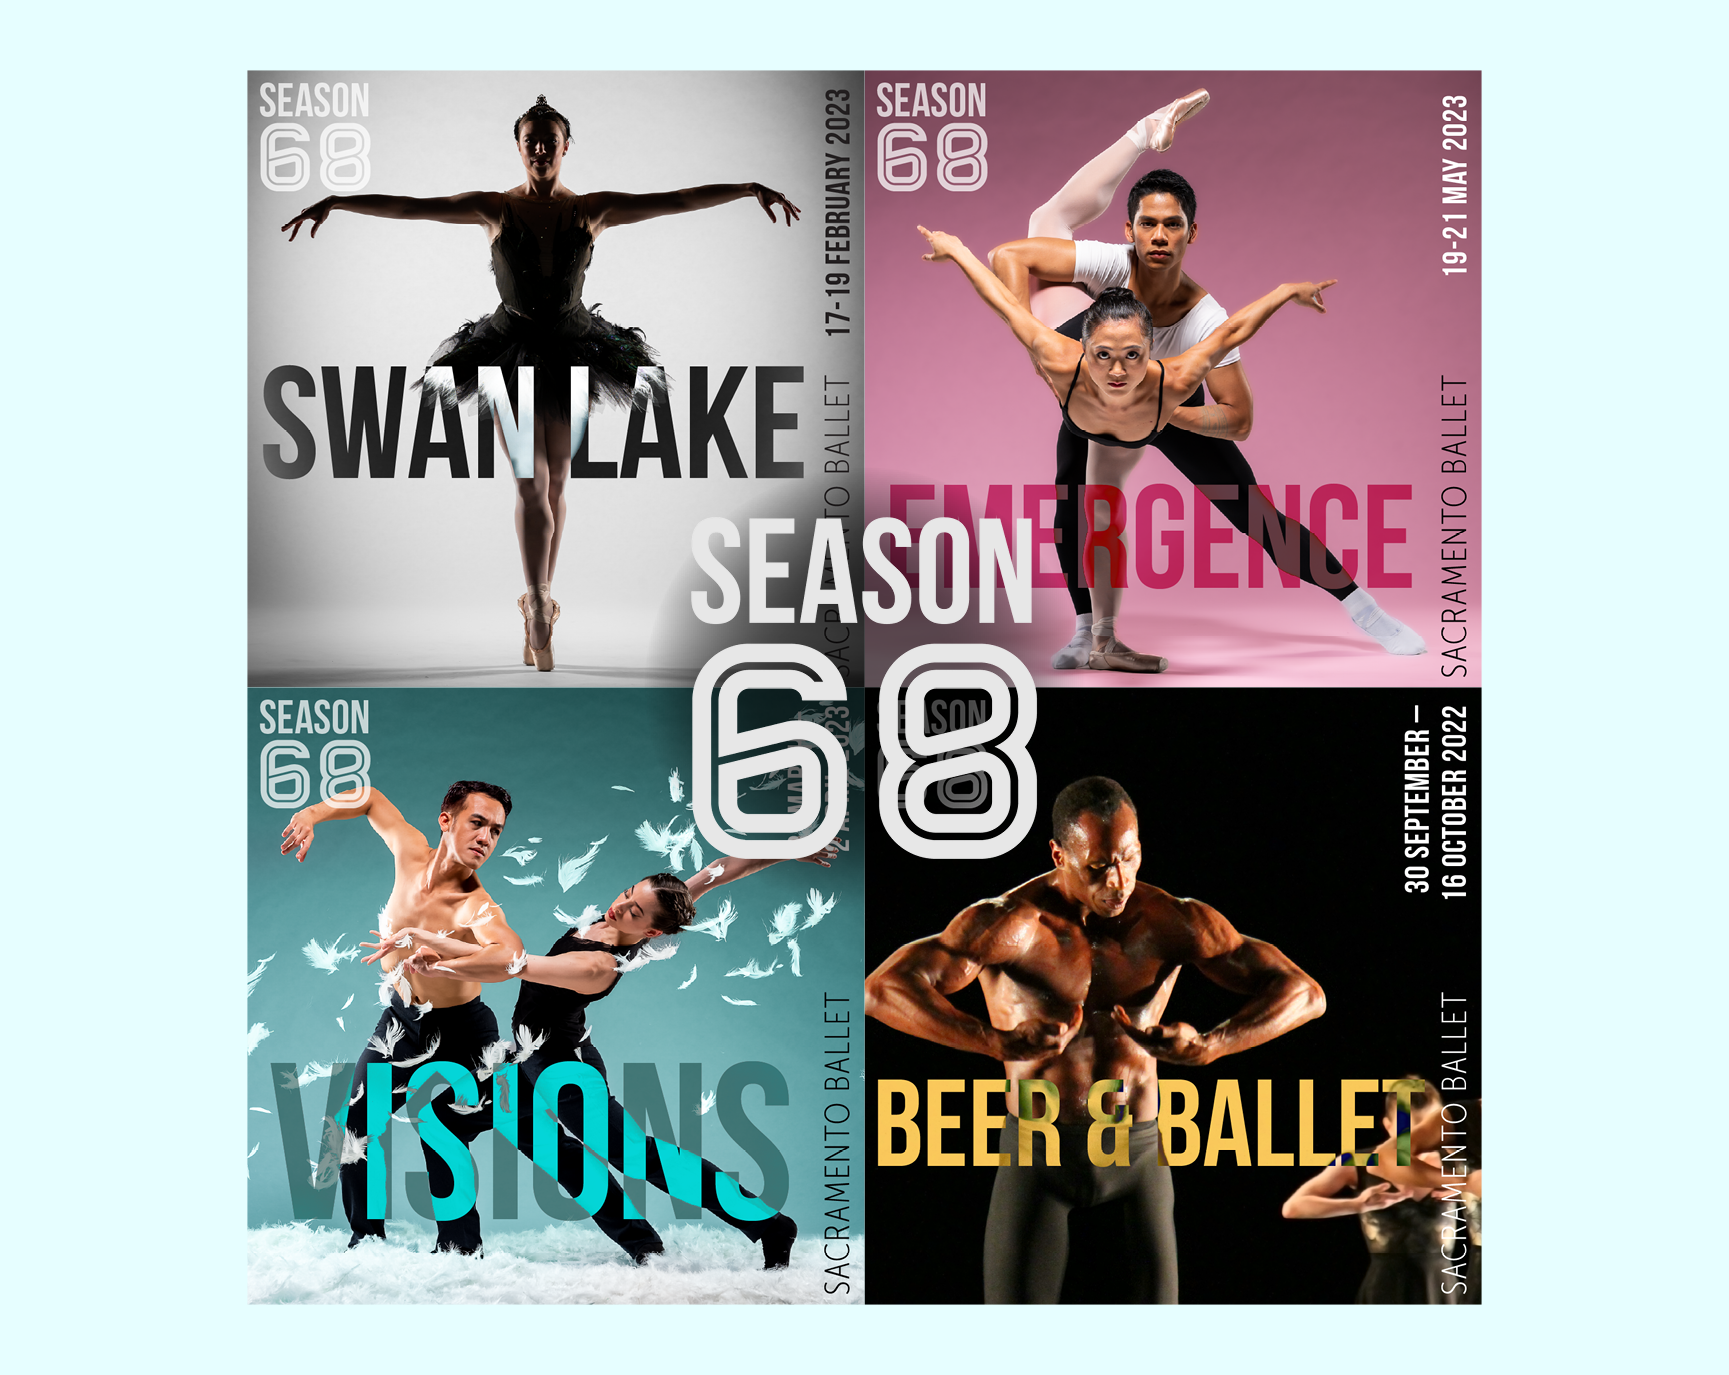 four square graphics with a picture of dancers and the name of ballets make up a grid with the season 68 logo in the middle